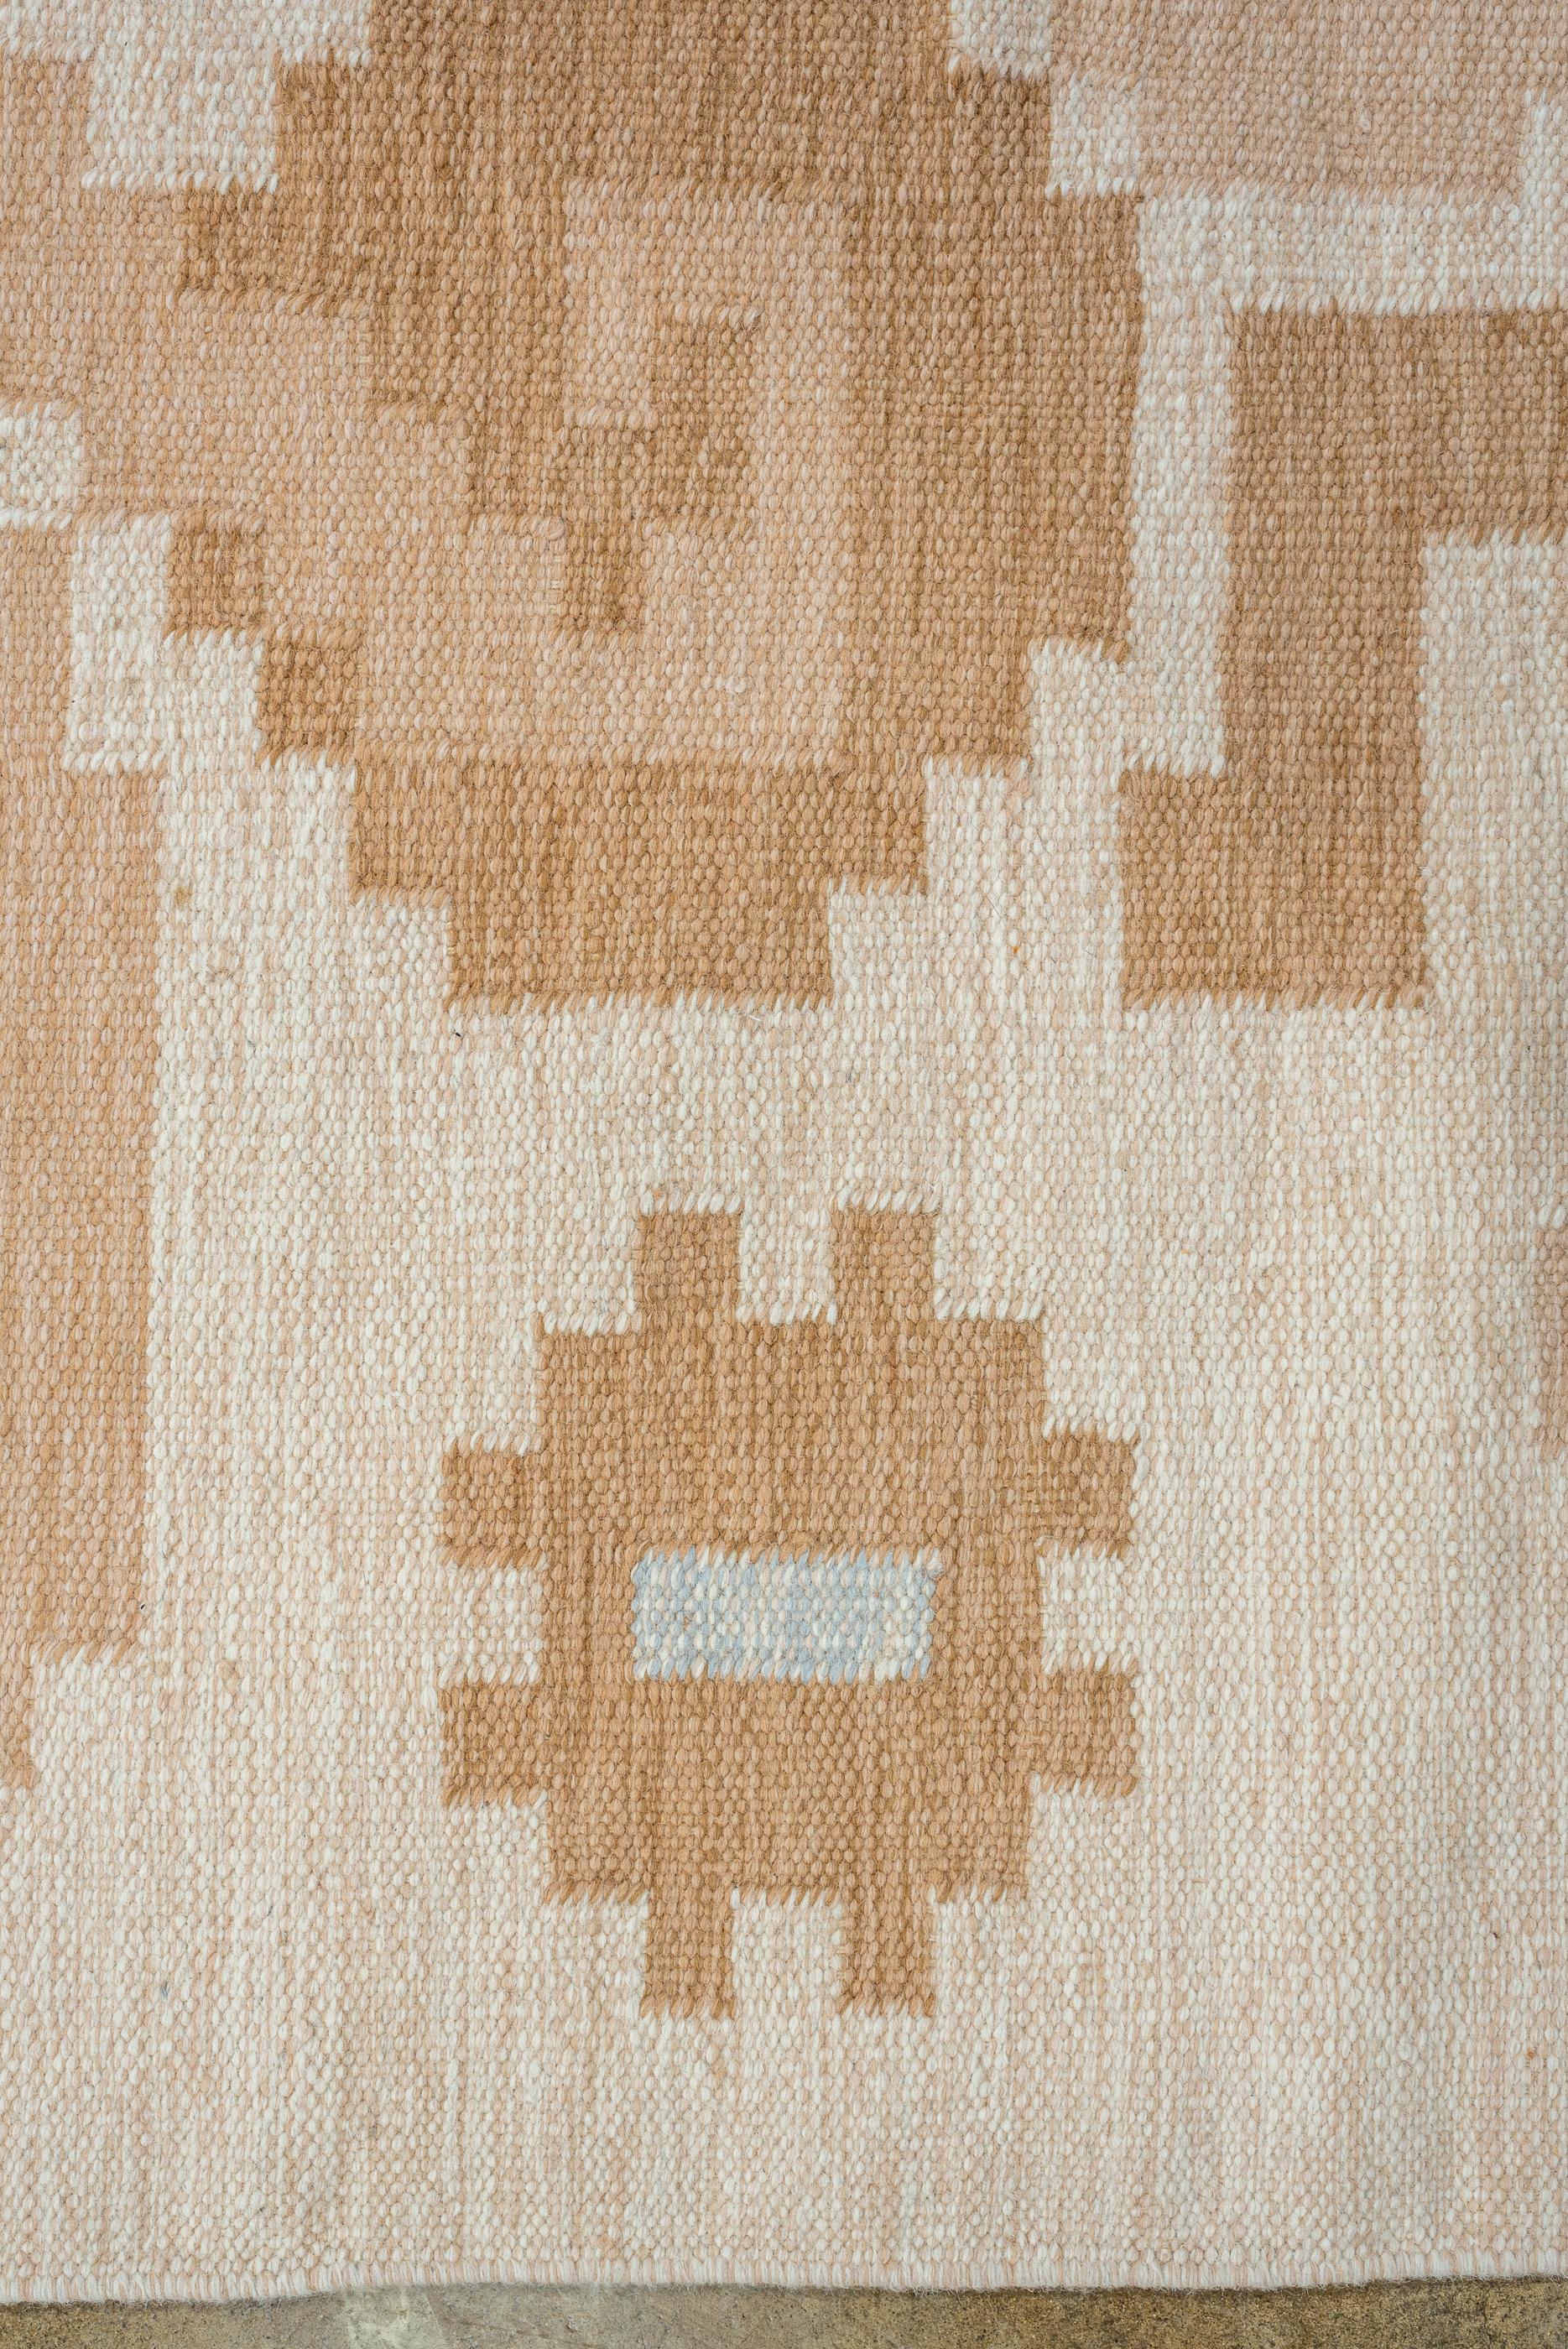 Modern Scandanavian Rollaken Flatweave Rug  In Excellent Condition For Sale In New York, NY